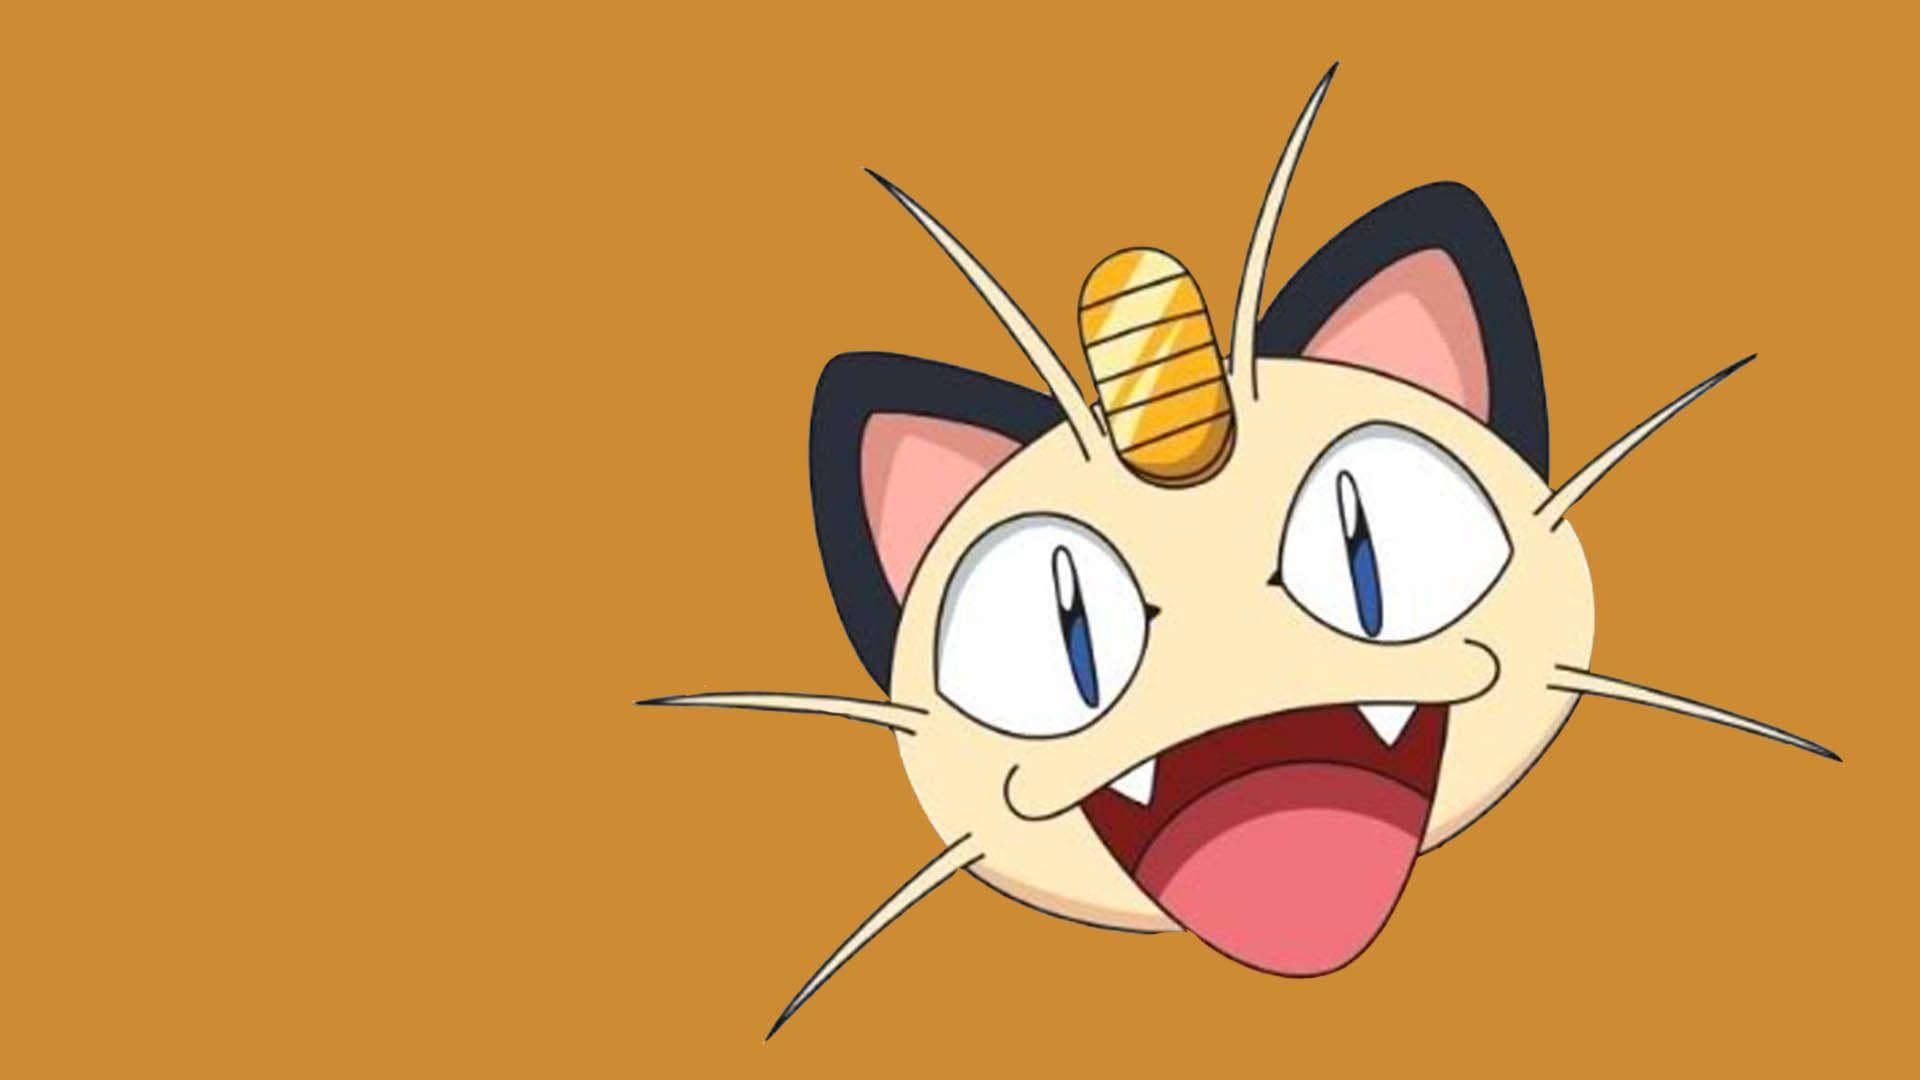 Happy Meowth Wallpapers by HD Wallpapers Daily.